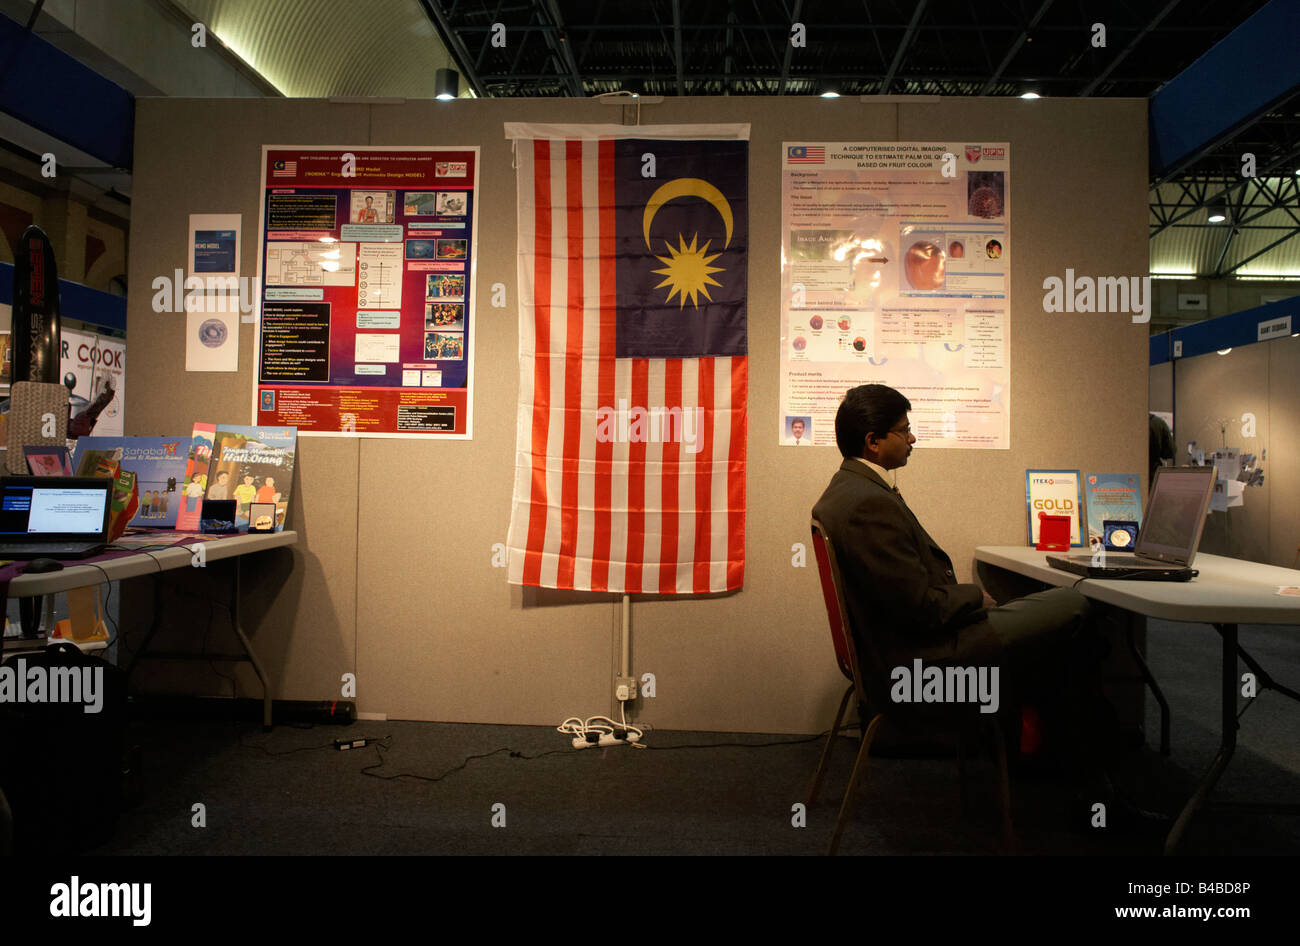 A patient Malaysian entrepreneur awaits investment for his concept at an inventors' fair in Alexandra Palace  London Stock Photo